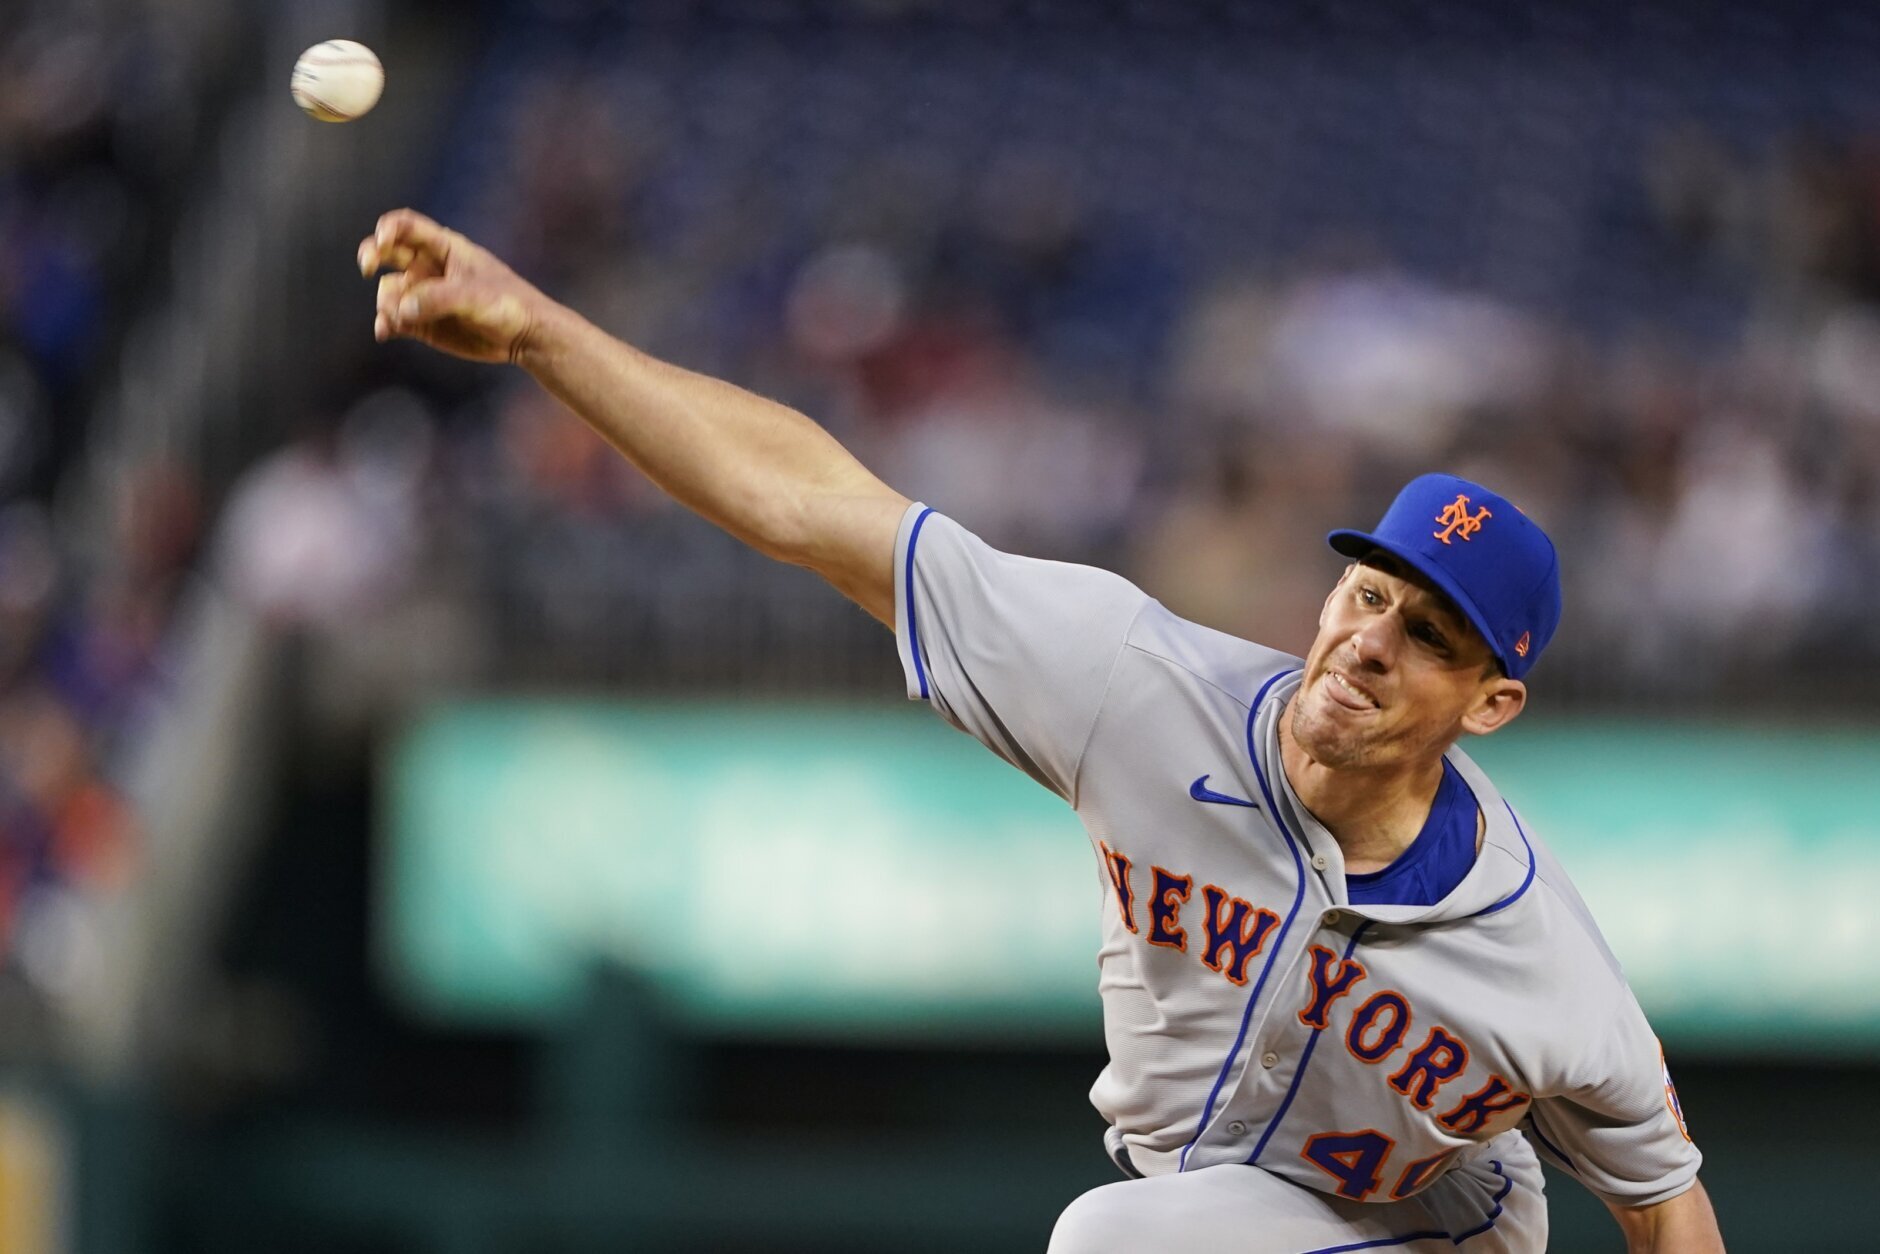 Batter up! In the Kitchen with New York Mets Pitchers Jacob deGrom